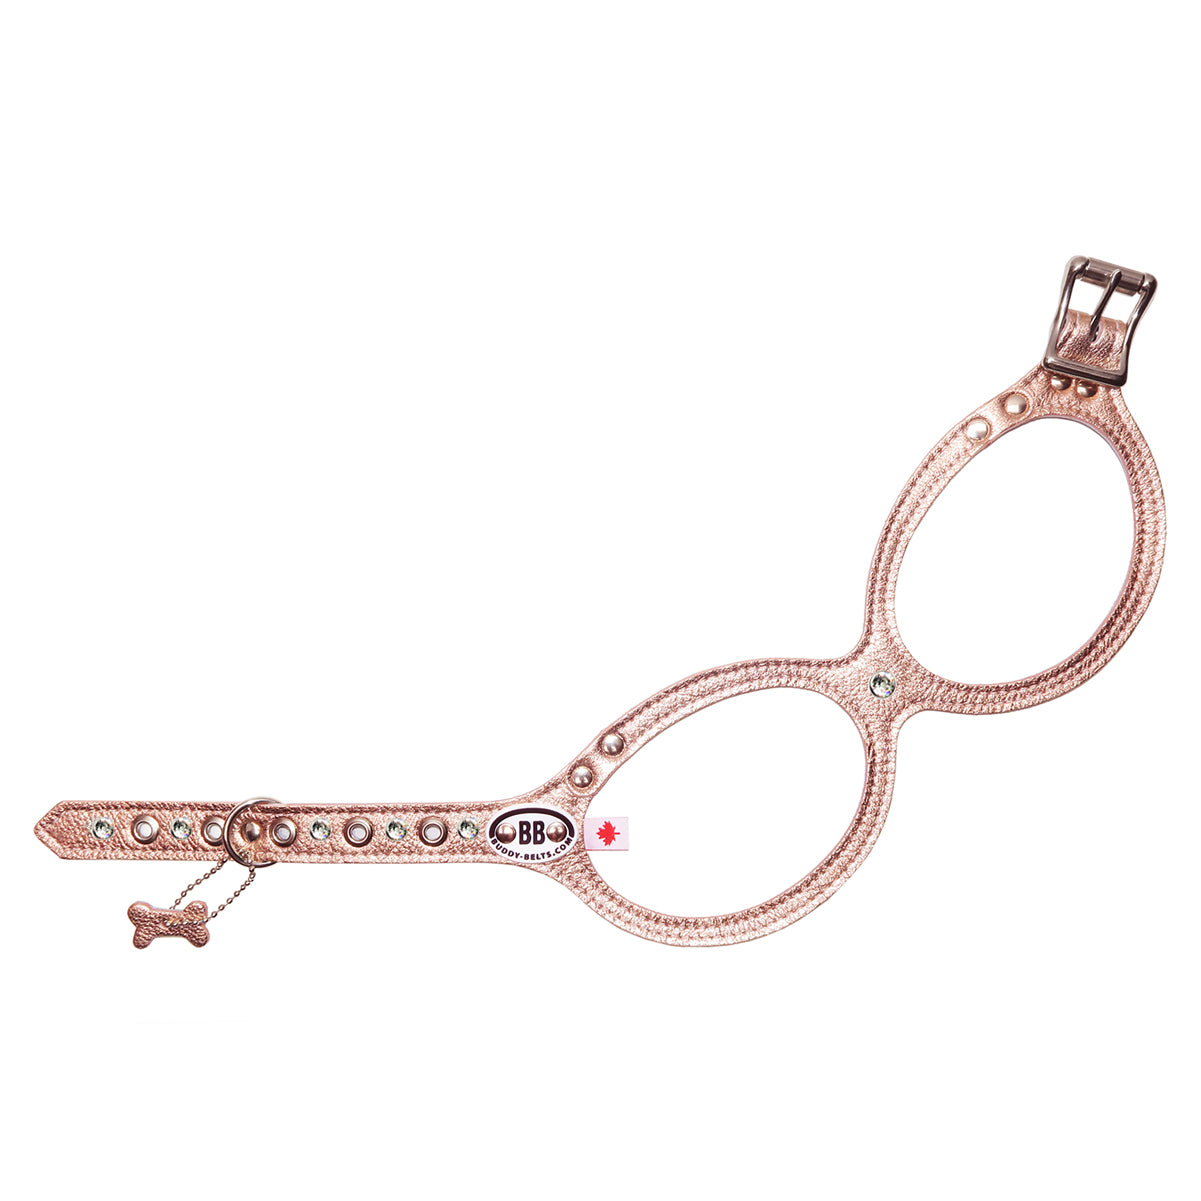 BB Harness, Size 8, Luxury Rose Gold, Crystals